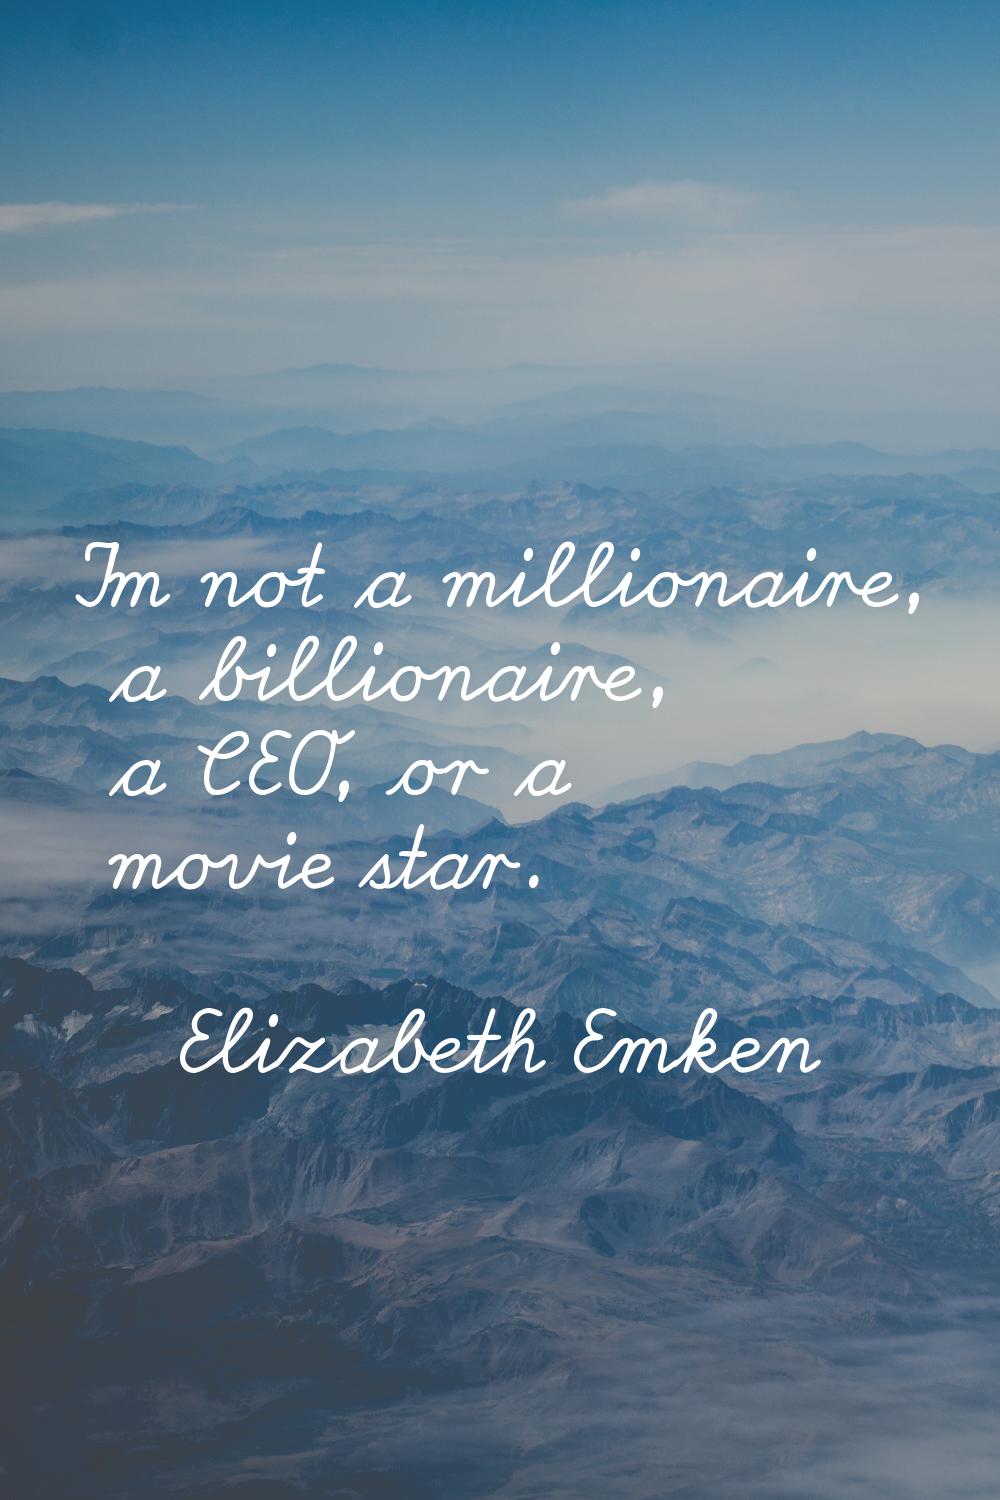 I'm not a millionaire, a billionaire, a CEO, or a movie star.